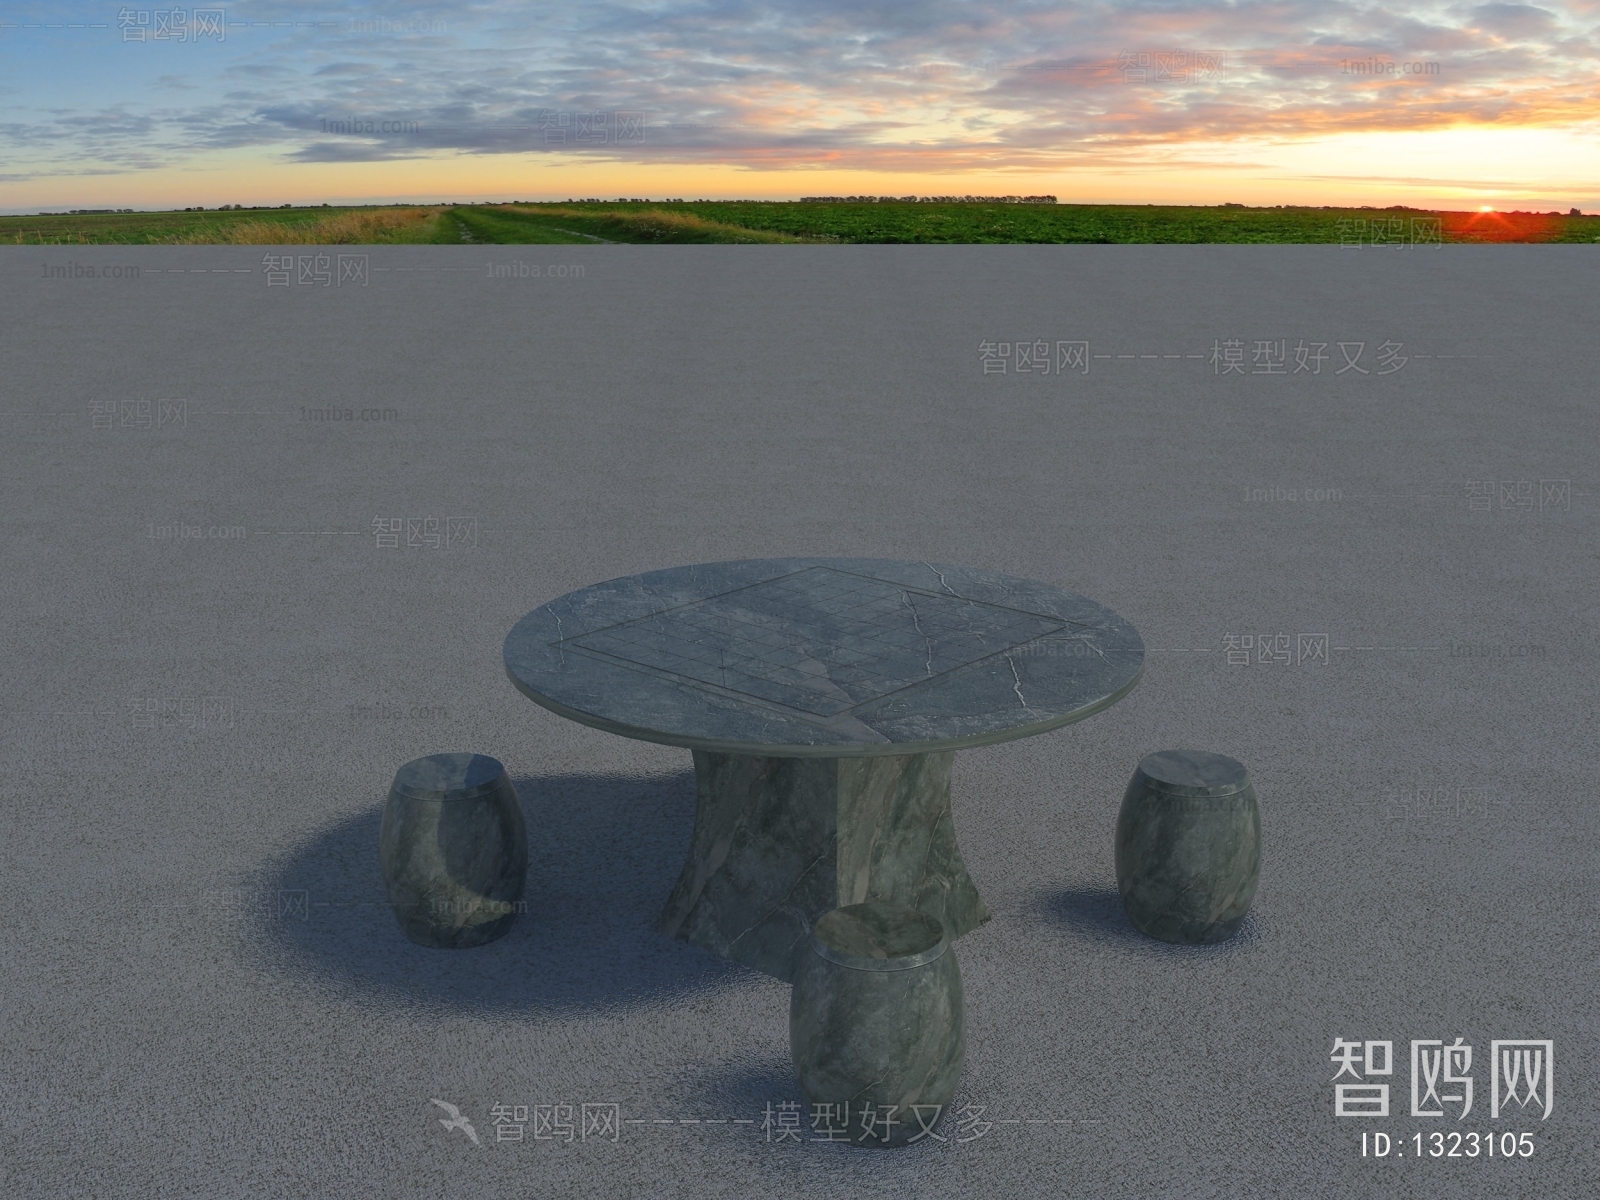 New Chinese Style Other Table